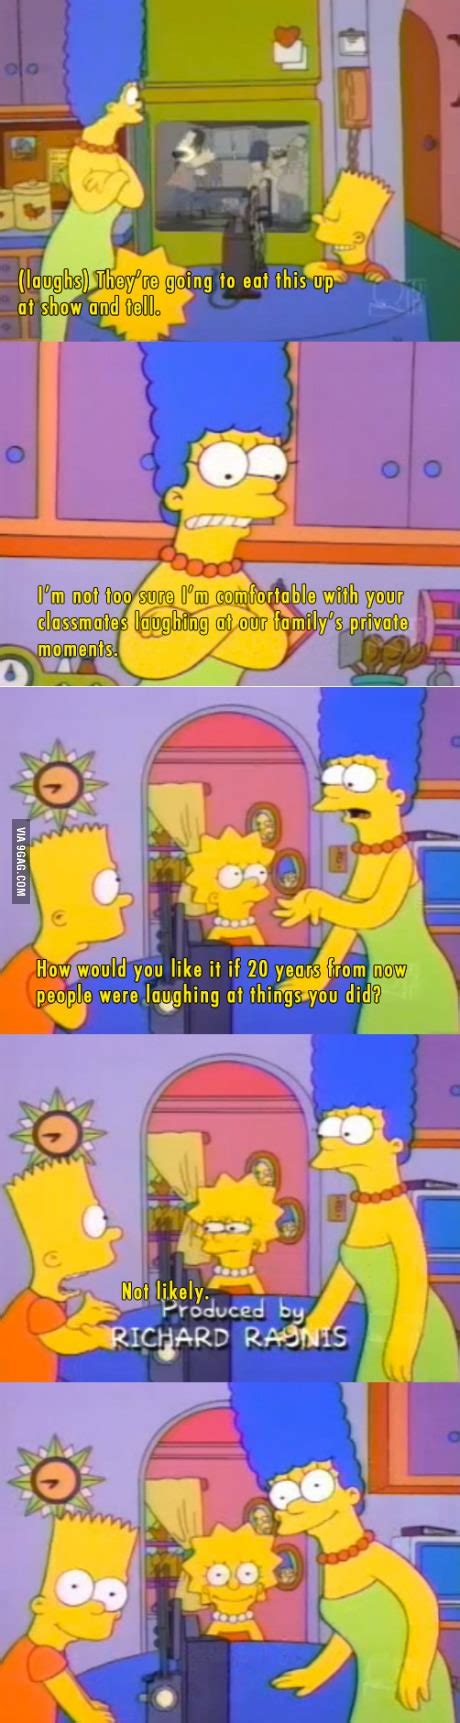 last night i dug up my early simpsons dvds this was the first line of dialogue on the first